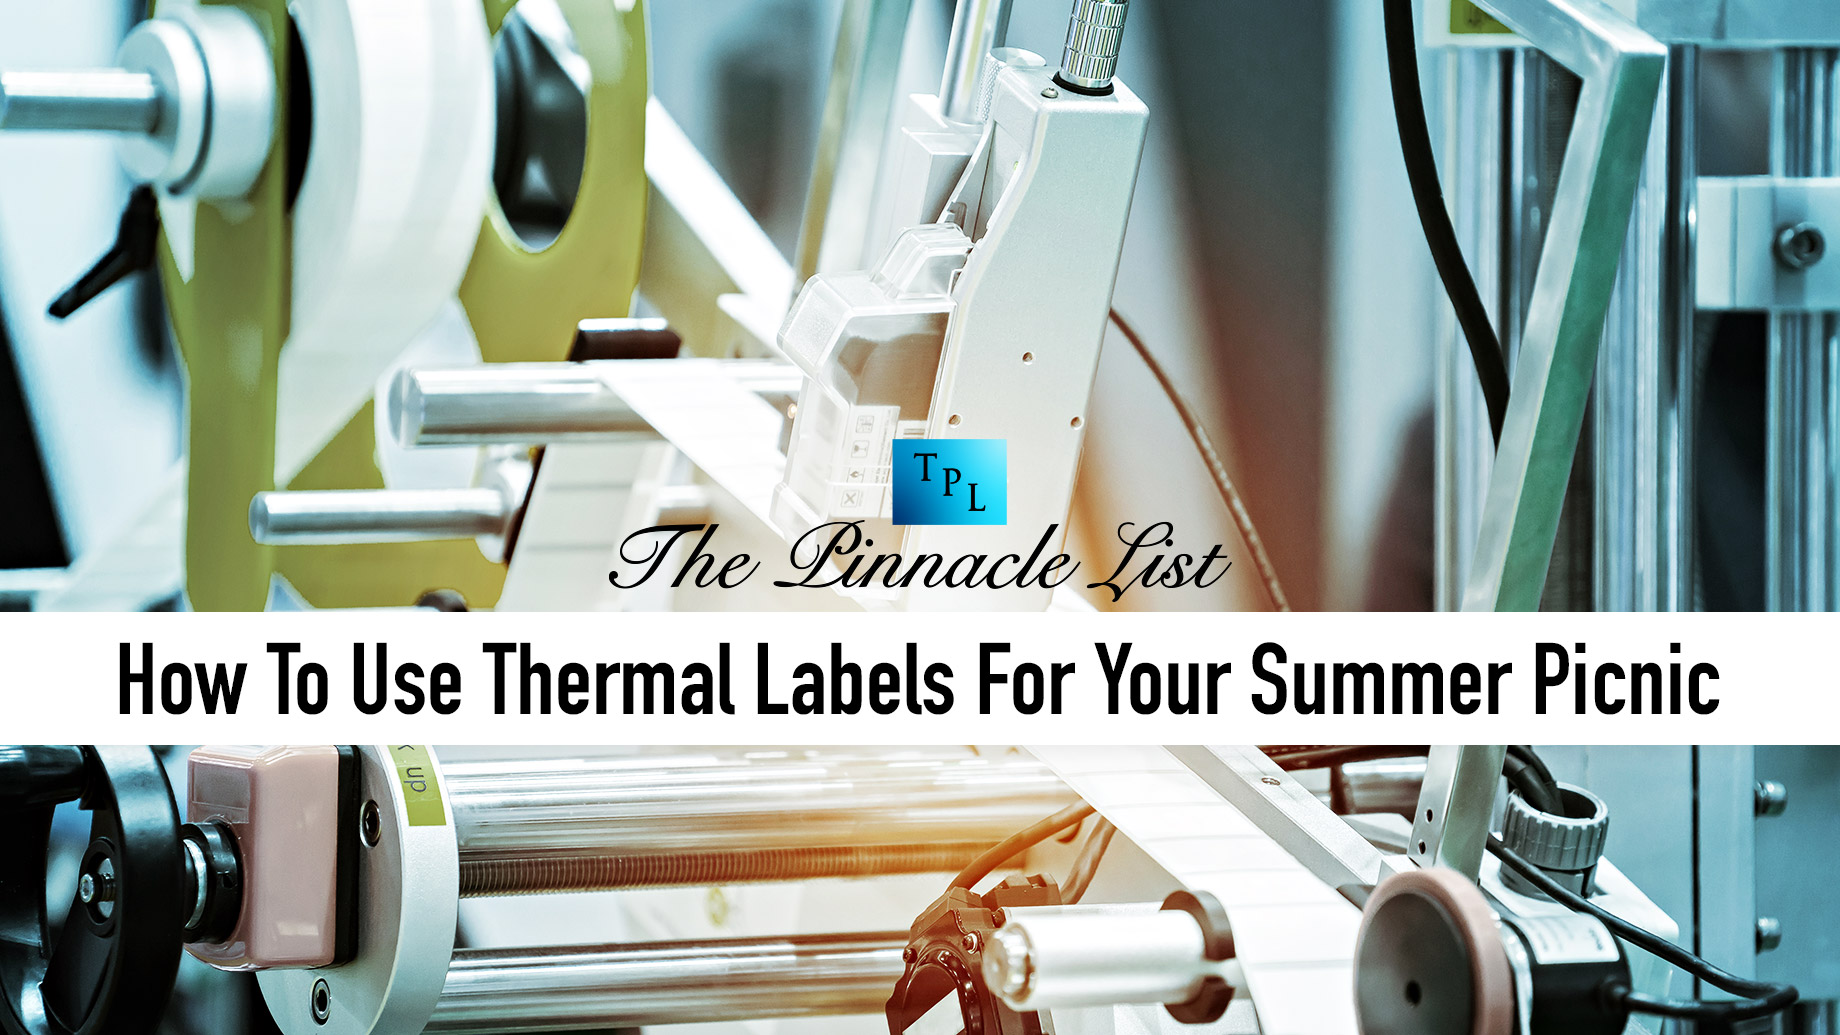 How To Use Thermal Labels For Your Summer Picnic